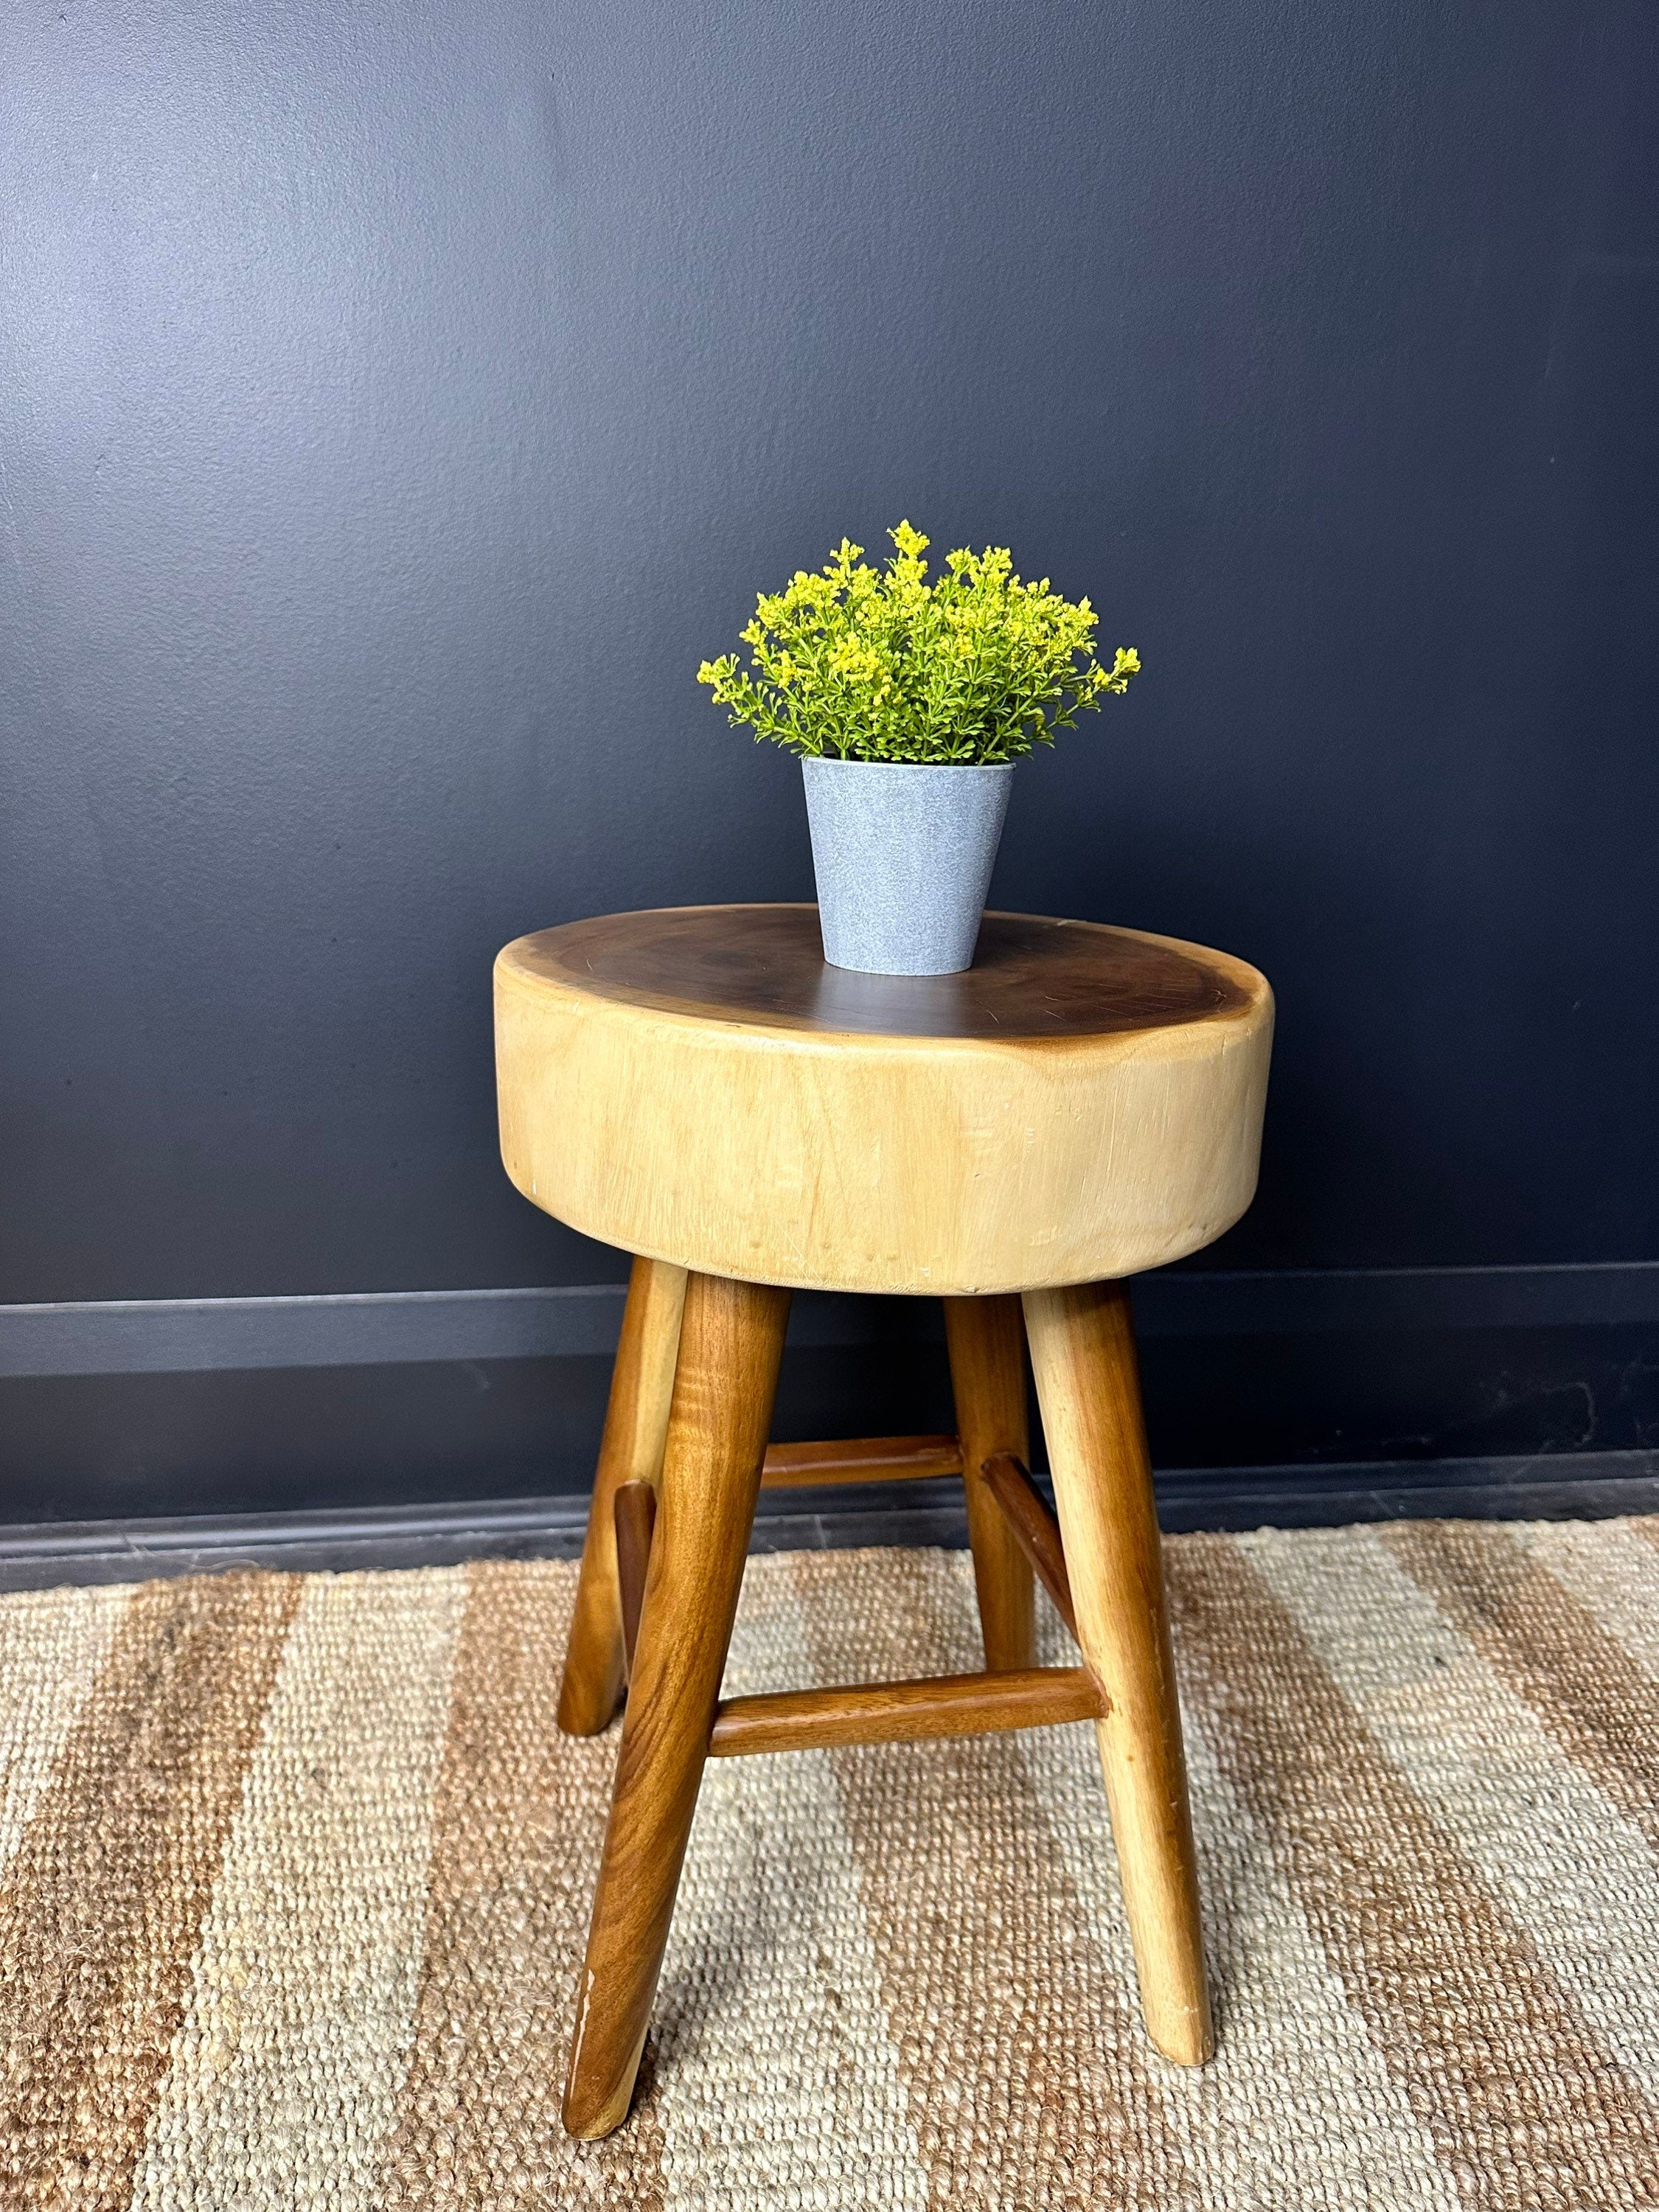 Solid Wood Accent Stool, Bathroom Stand, Teak Plant Stand, Wooden Side Table